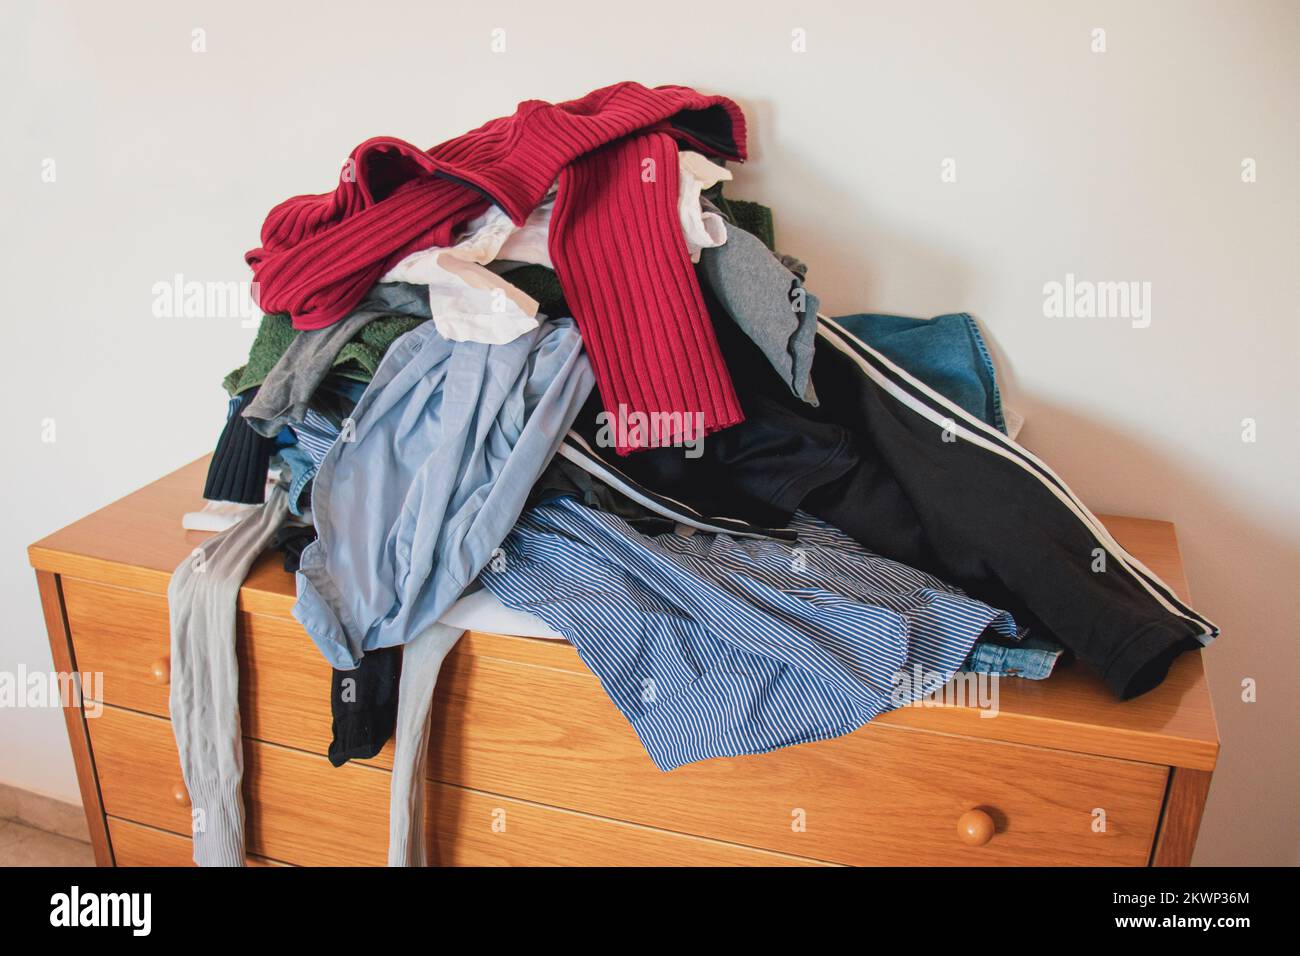 Pile of unfolded clothes on a for laundry on a drawer. Concept of minimalism, mess and wardrobe cleaning. Stock Photo